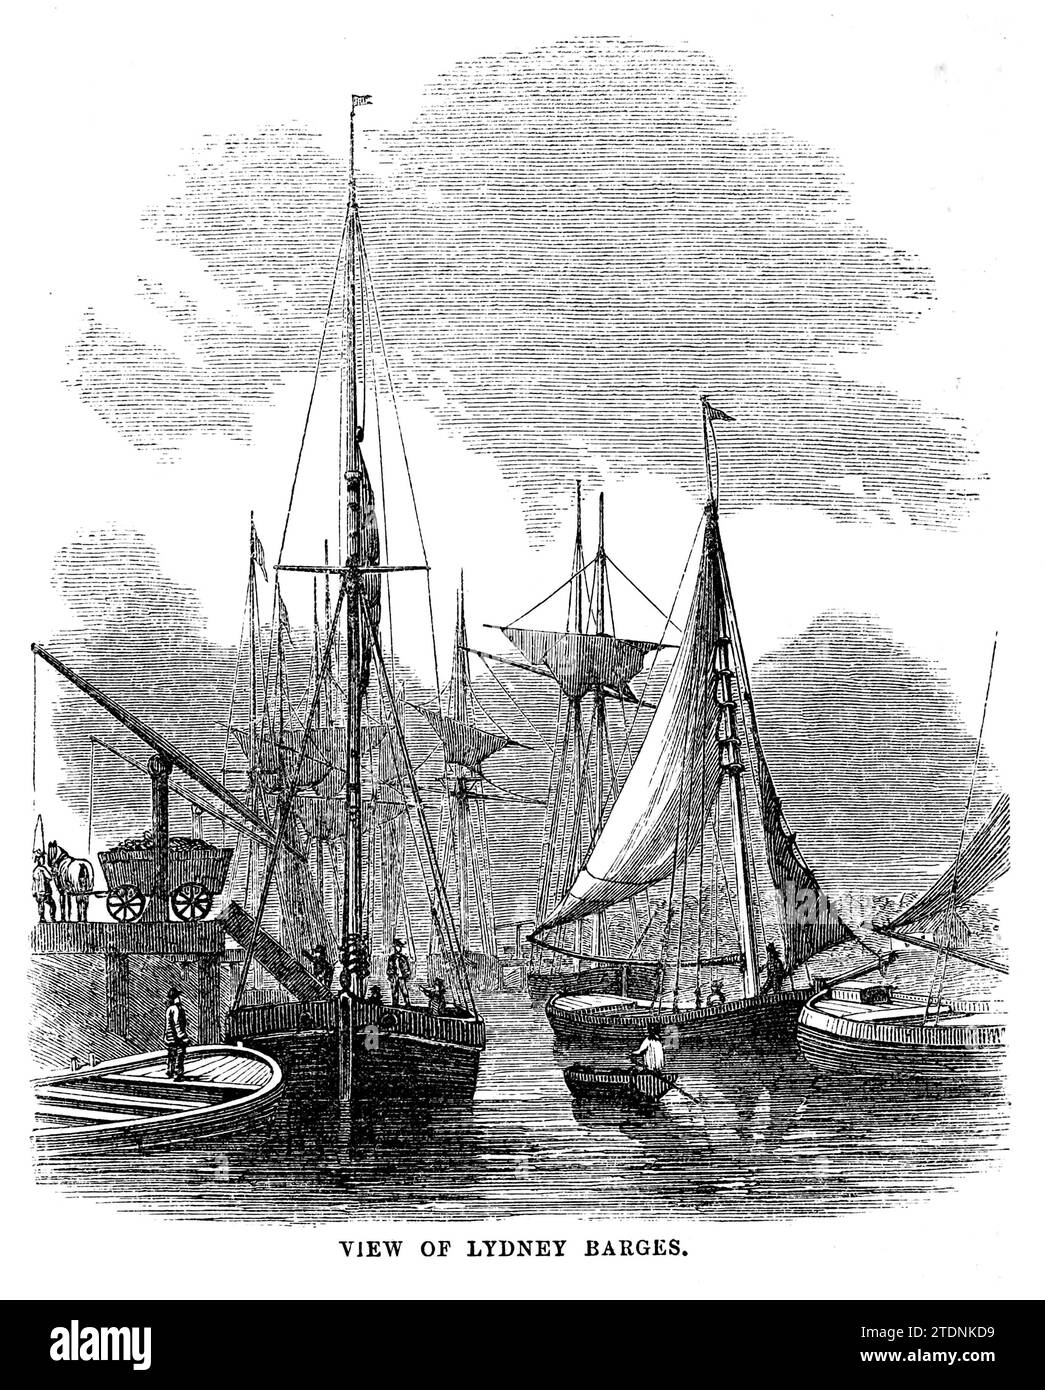 View of Lydney Barges from the book The Severn valley: a series of sketches, descriptive and pictorial, of the course of the Severn: containing notices of its topographical, industrial, and geological features; with glances at its historical and legendary associations by Randall, John, 1810-1910 Publication date 1862 Publisher J. S. Virtue Stock Photo